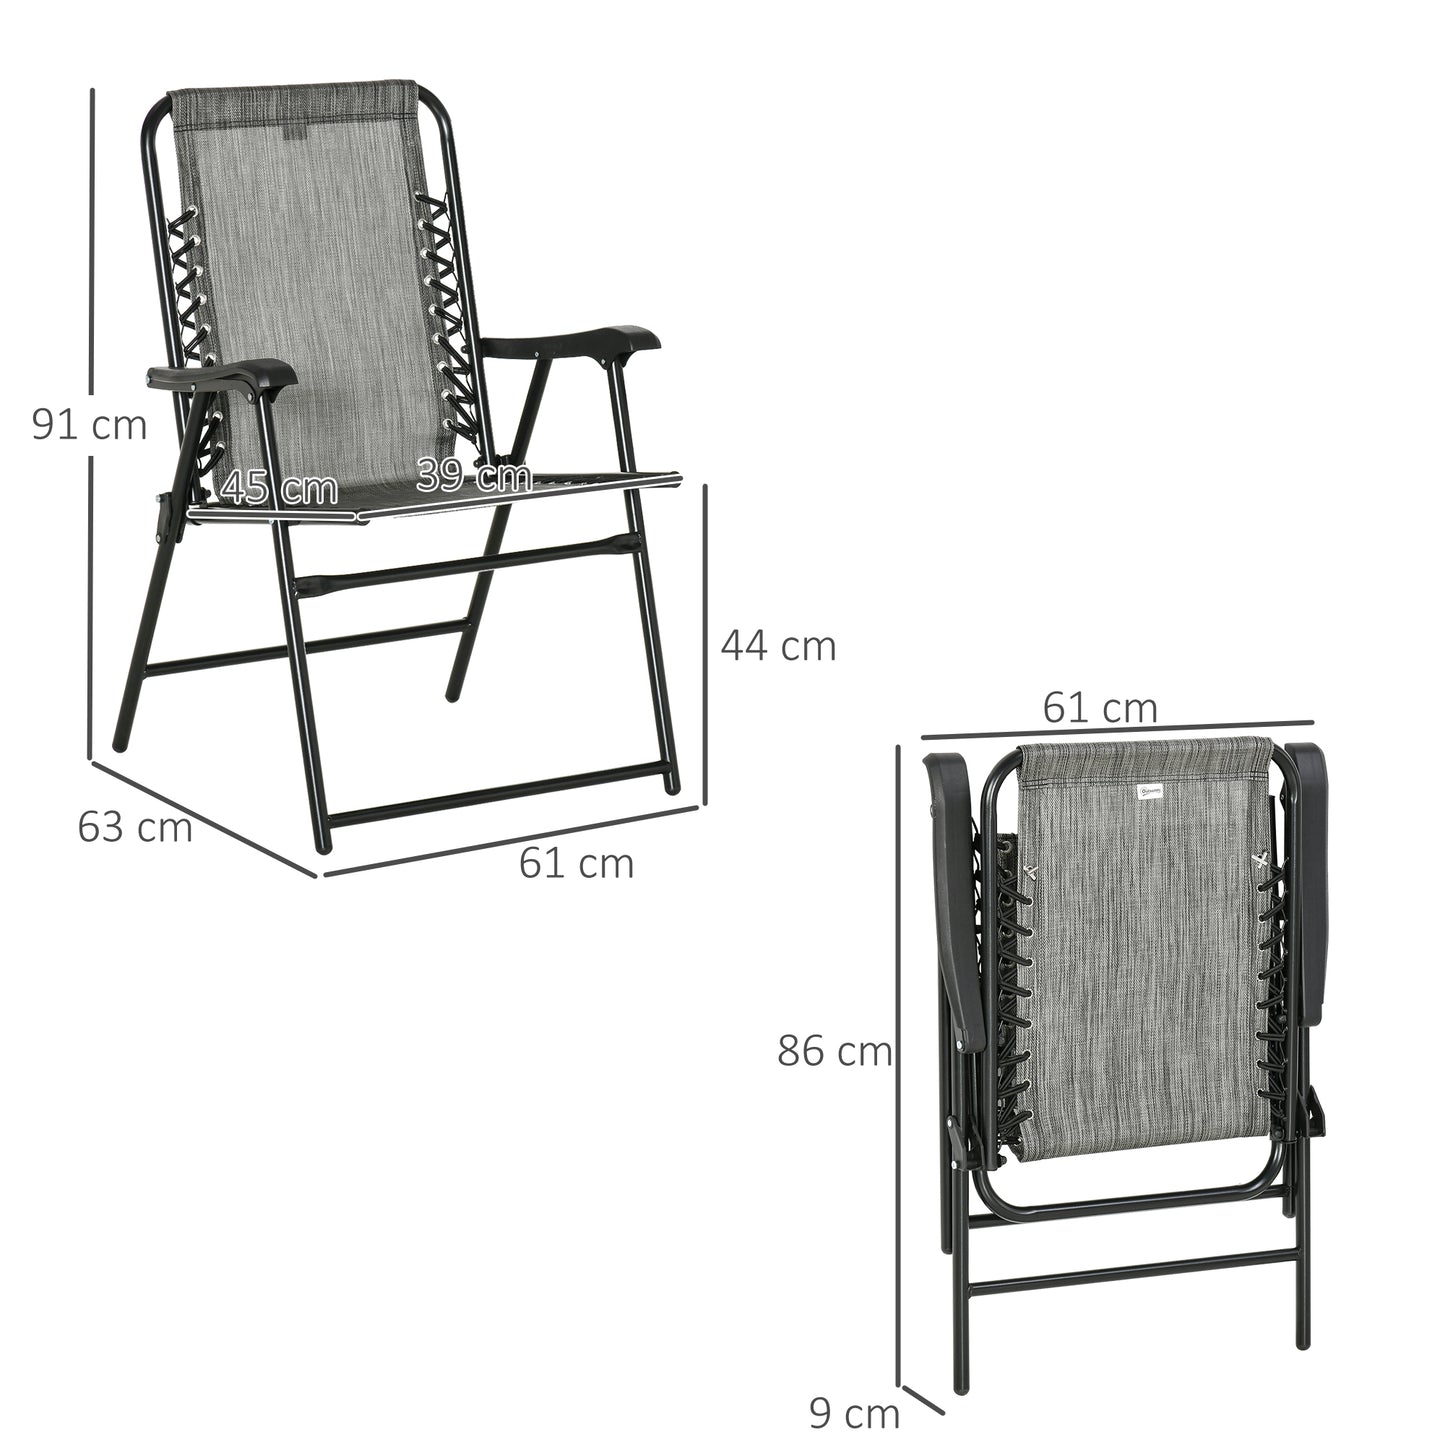 Outsunny Set of 6 Patio Folding Chair Set, Garden Portable Chairs w/ Armrest, Breathable Mesh Fabric Seat, Backrest, for Camping, Beach, Grey